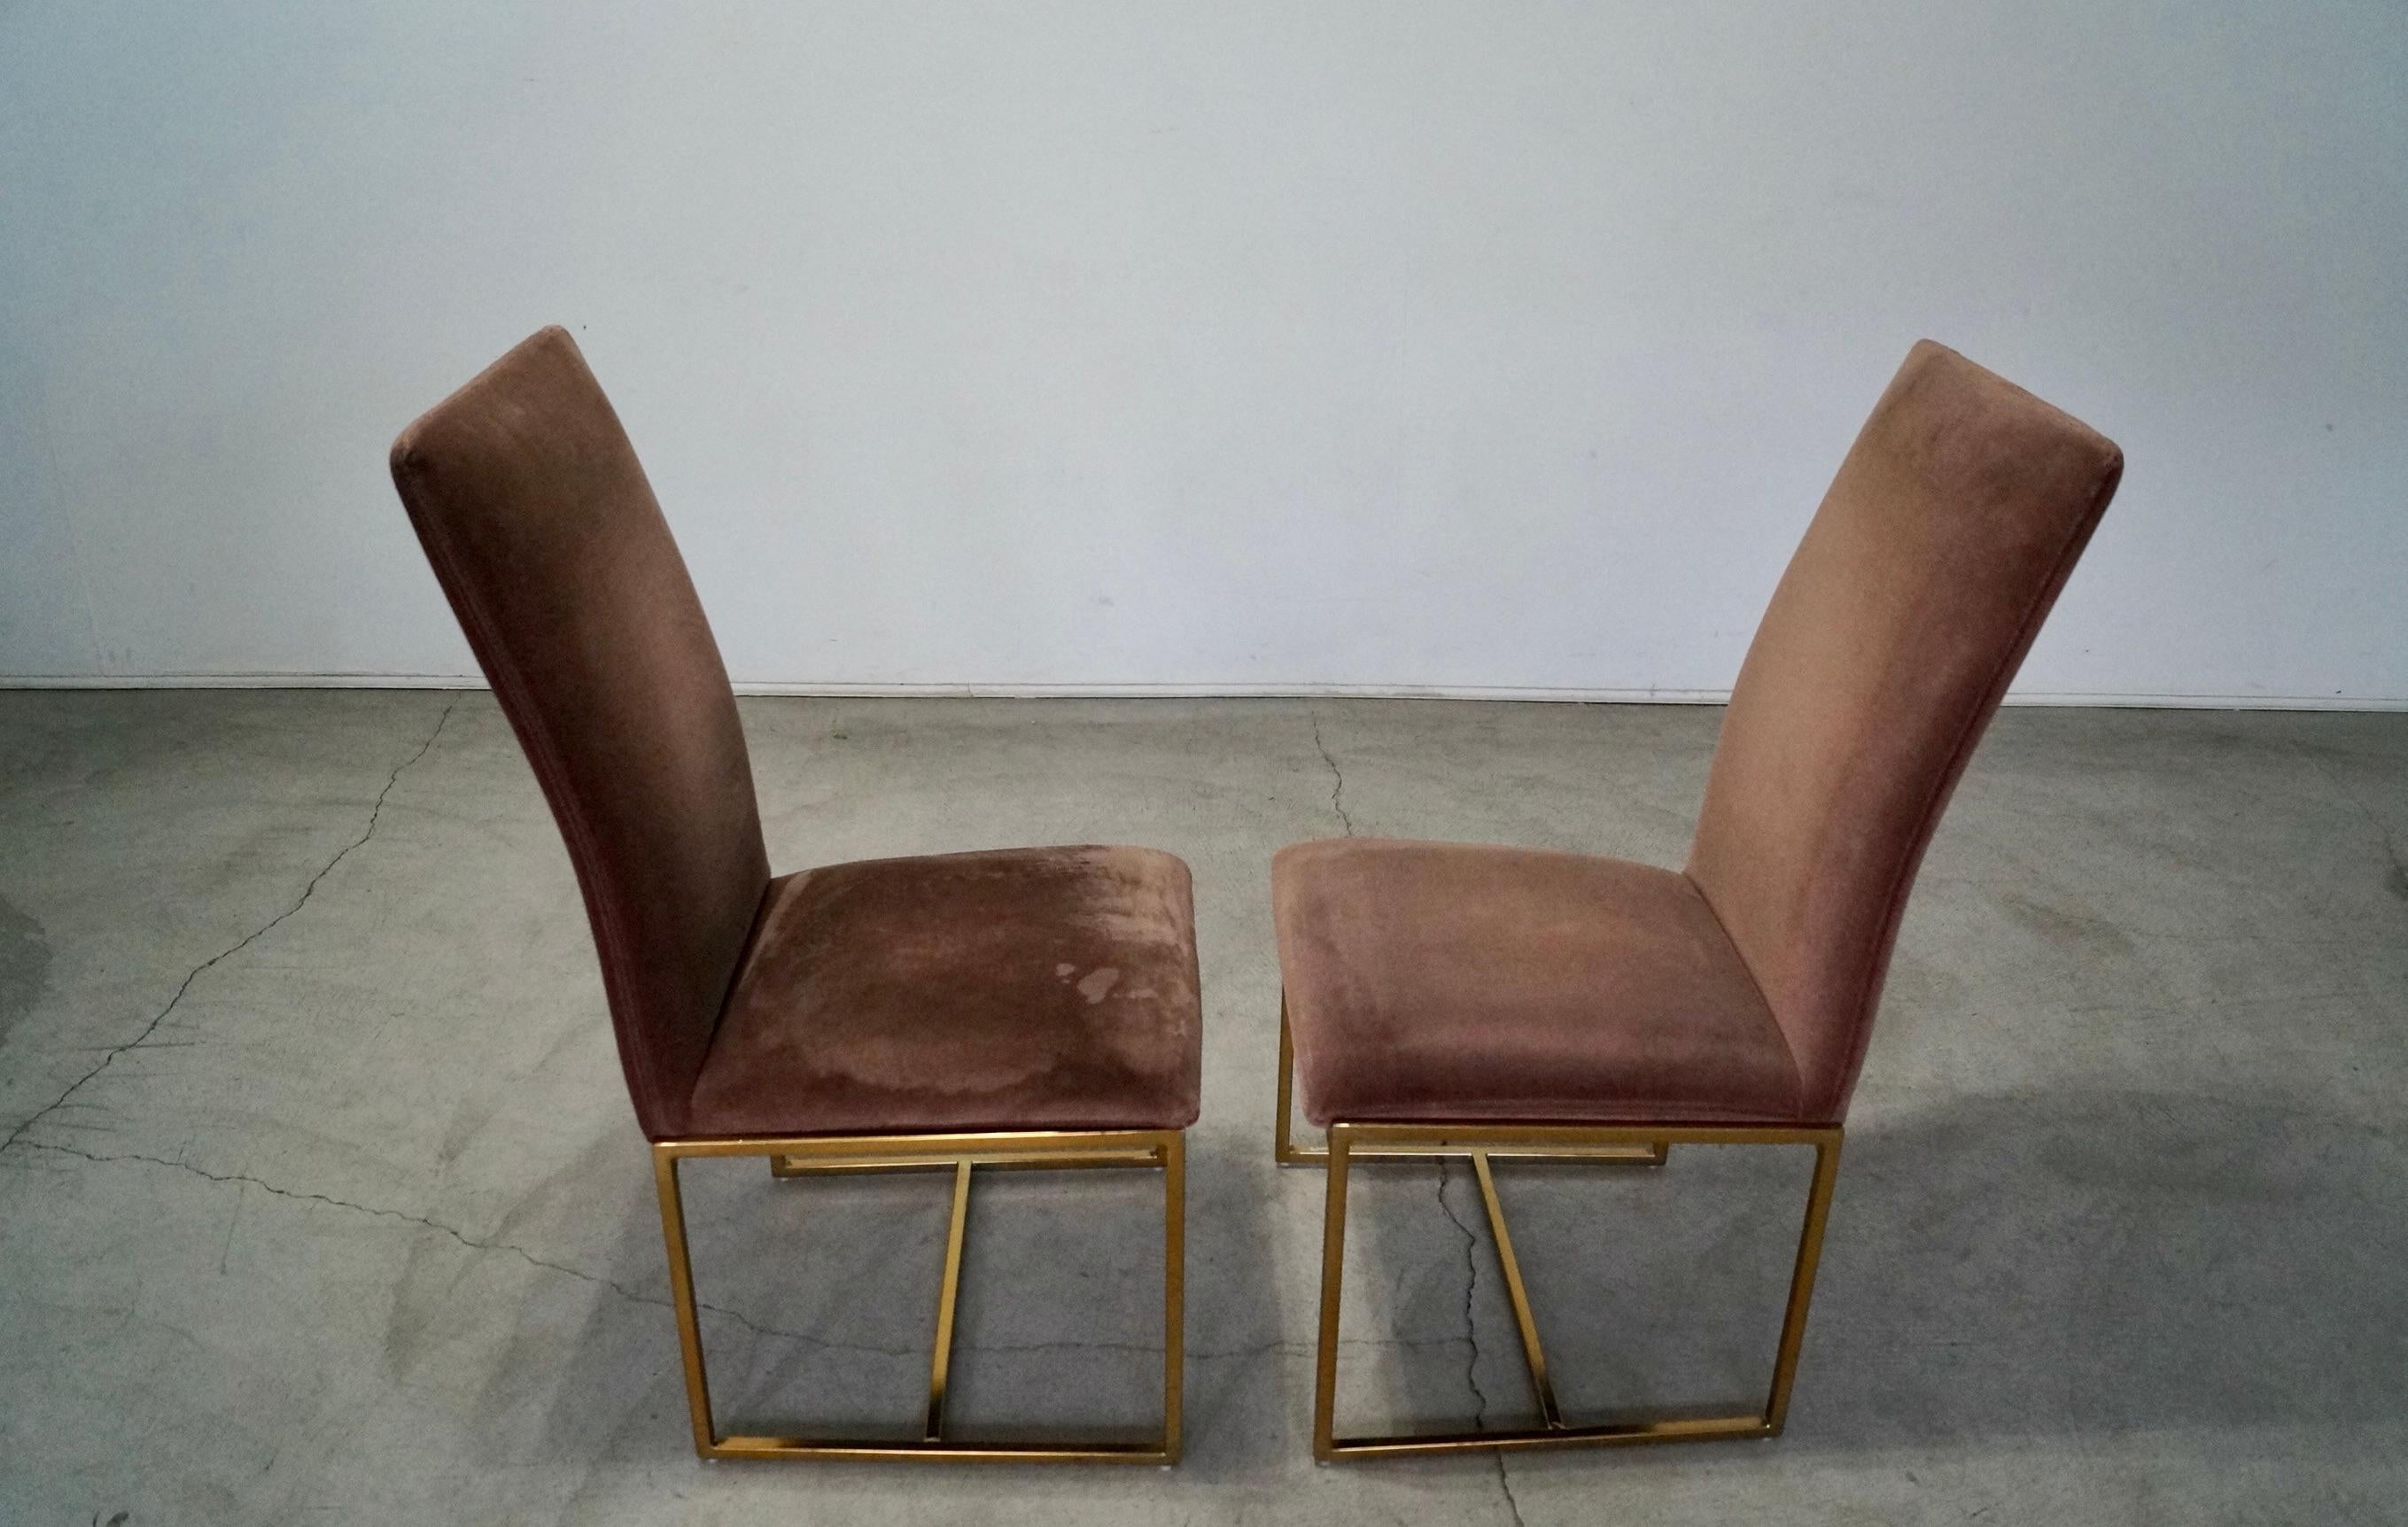 1970's Mid-Century Modern Milo Baughman Style Brass Dining Chairs - a Pair For Sale 2